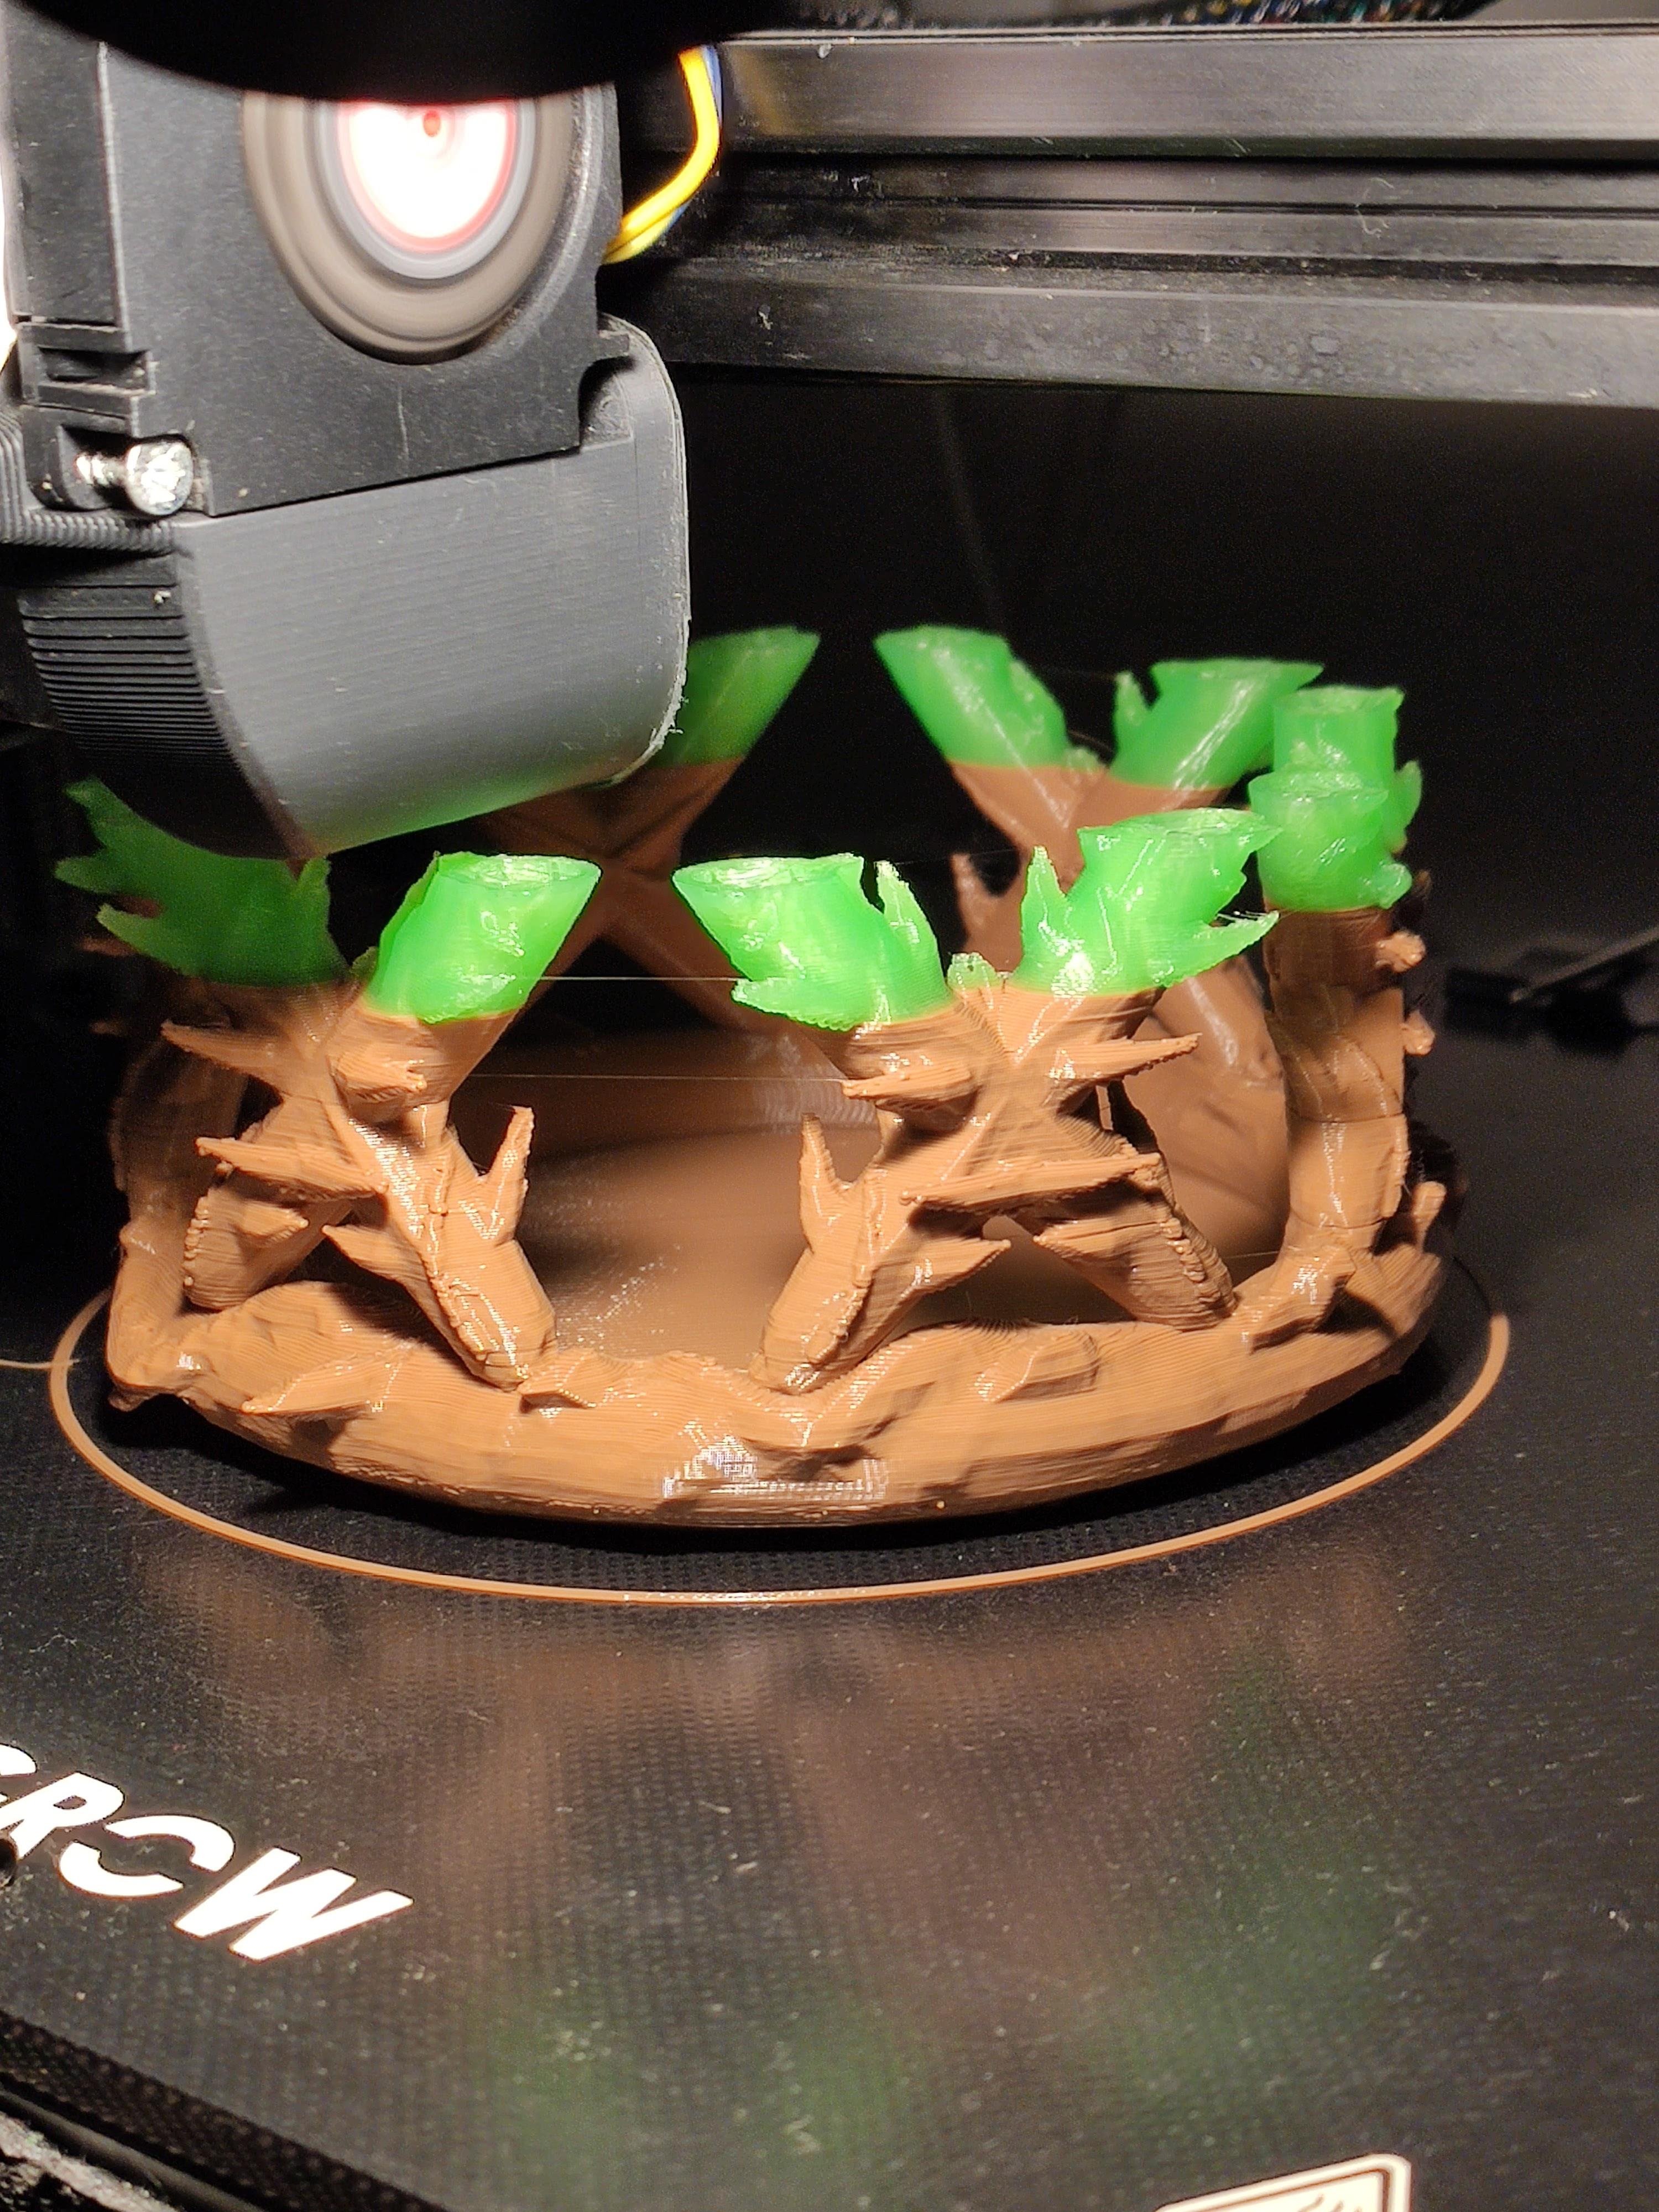 Jungle Vine Desk Organiser (easy, no support print) - Its on his way 🤗
Almost finished now after 20 hr. - 3d model